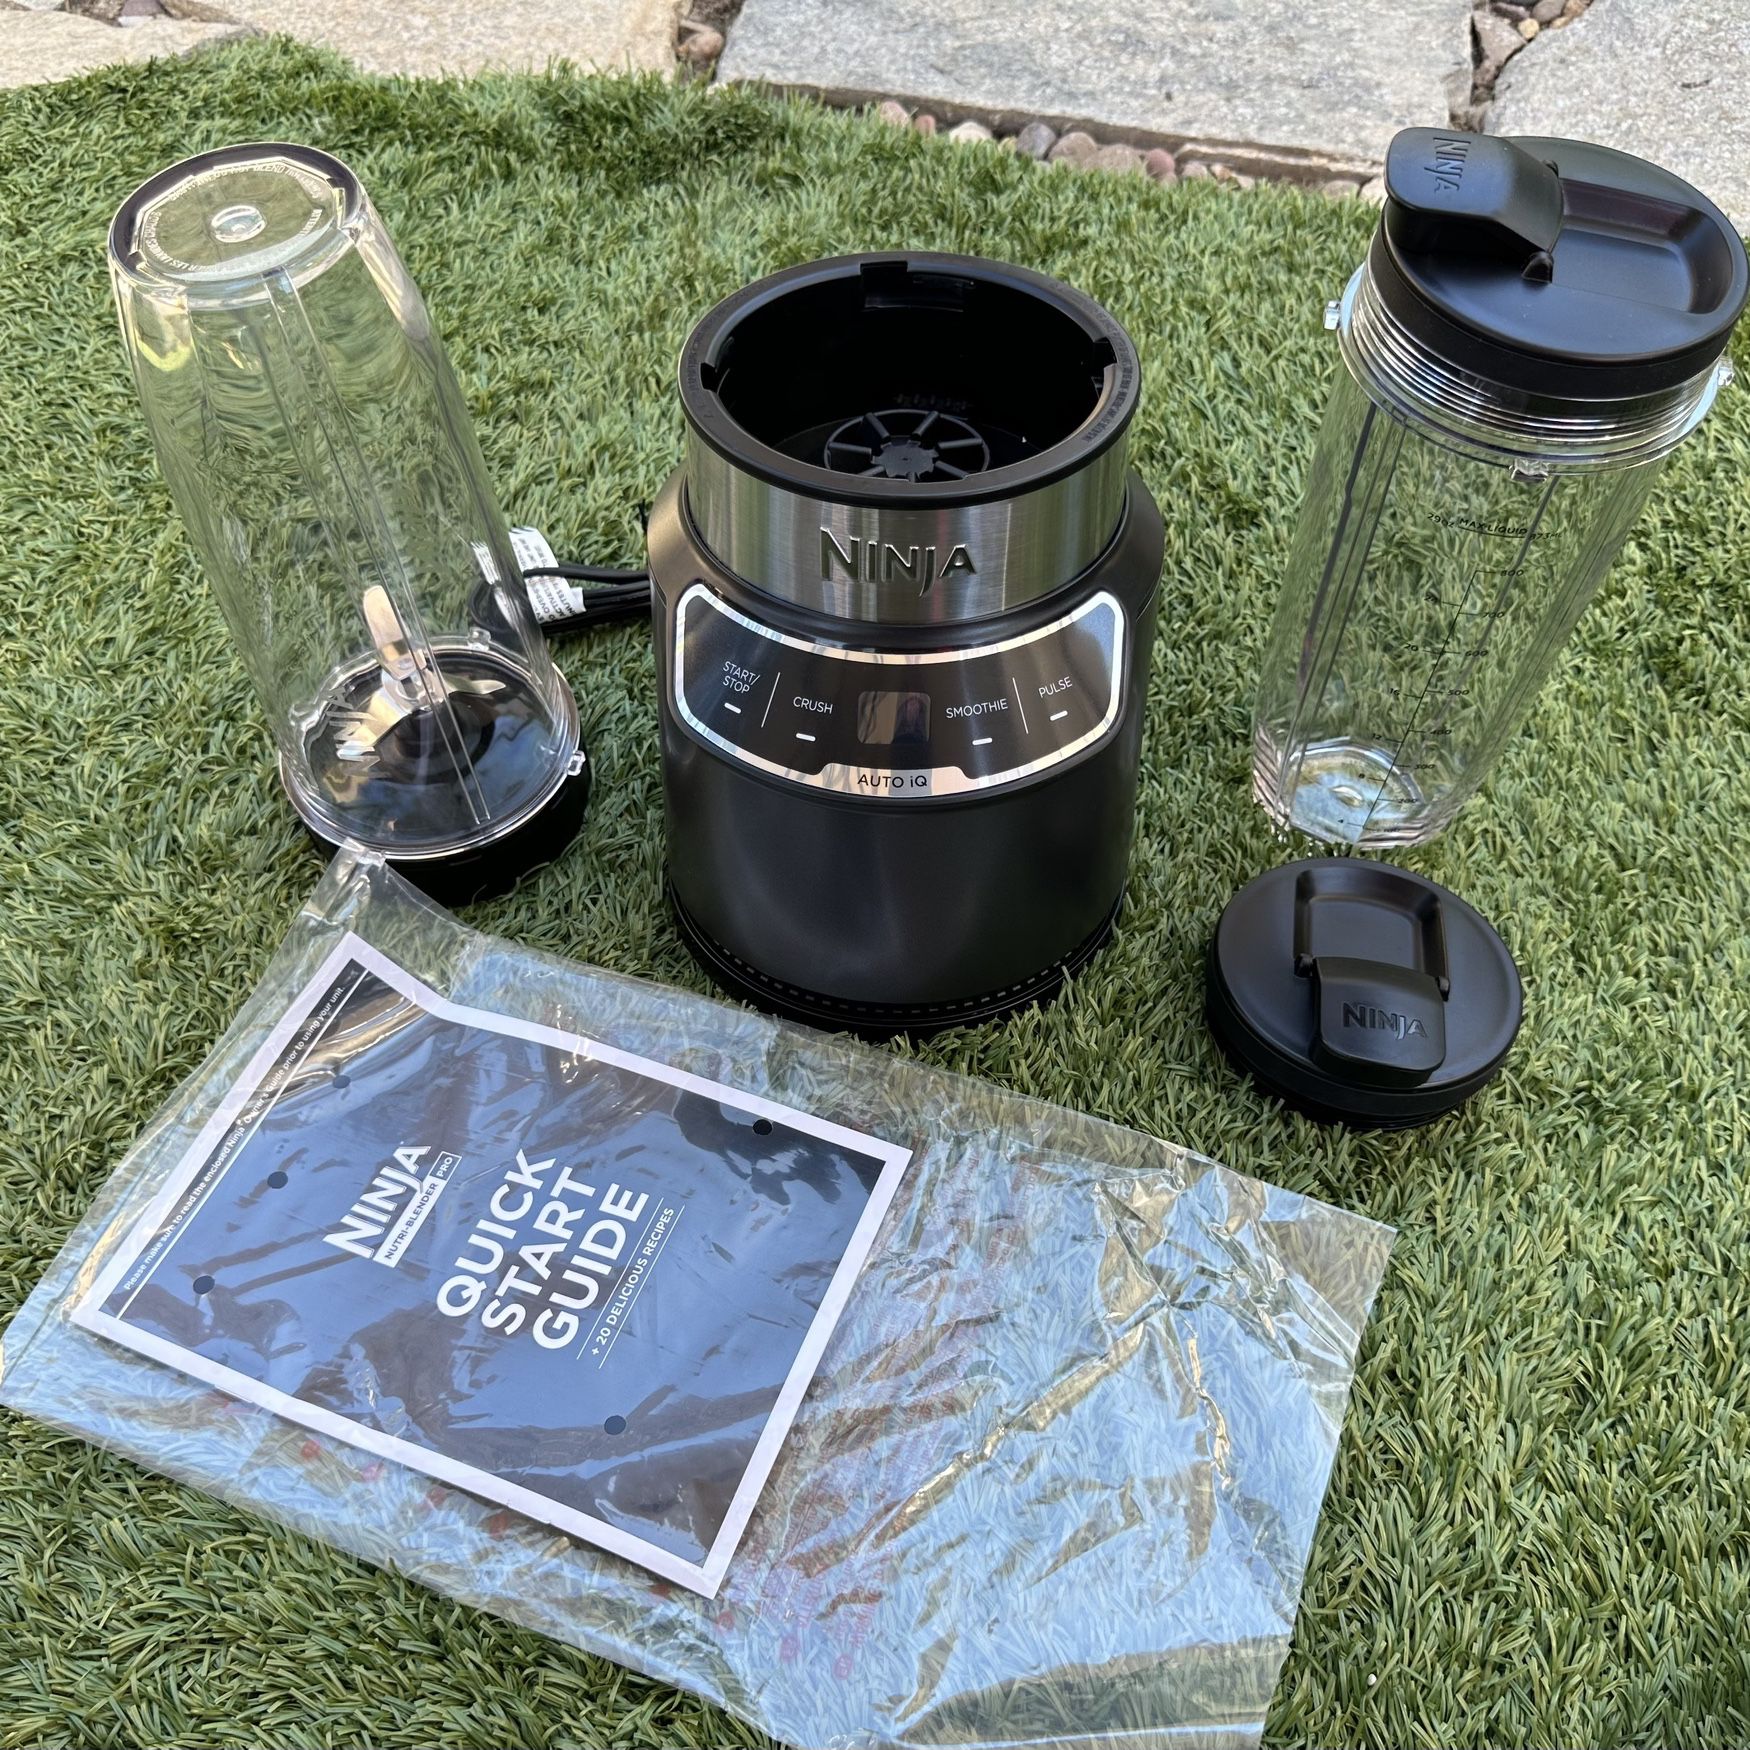 Ninja Nutri-Blender Pro with Auto-iQ for Sale in Lakeside, CA - OfferUp